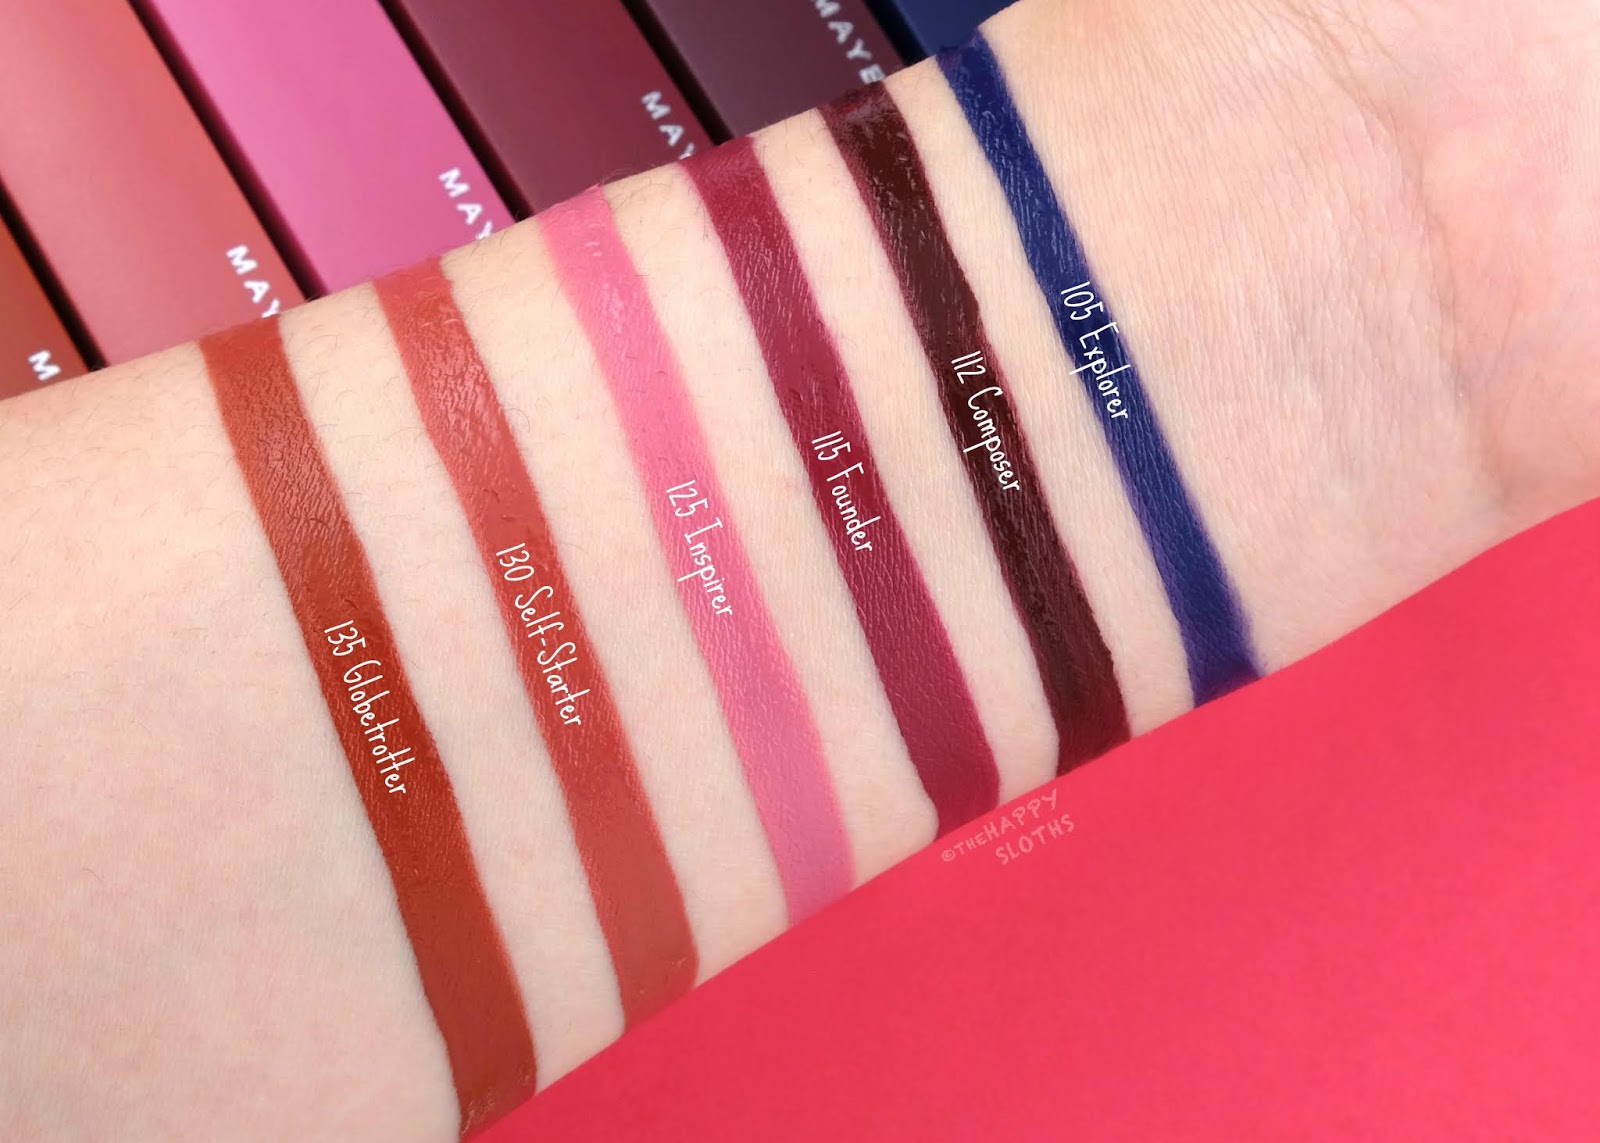 Maybelline Superstay Matte Ink *Spiced Edition* [Swatches + Comparisons]